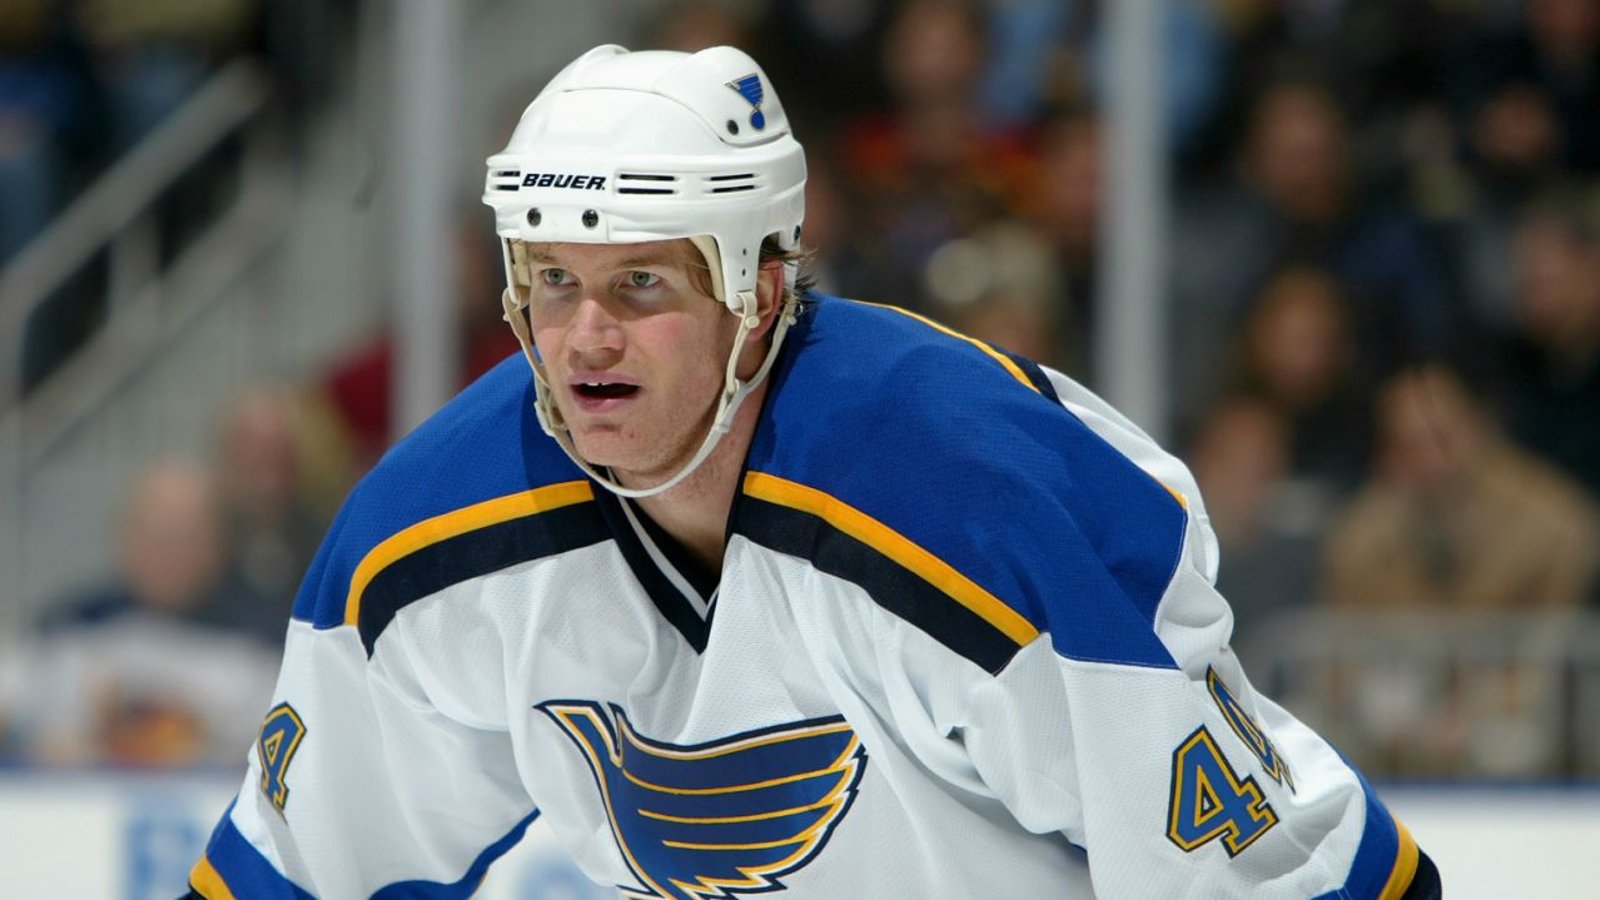 Blues announce they will retire Chris Pronger's number.